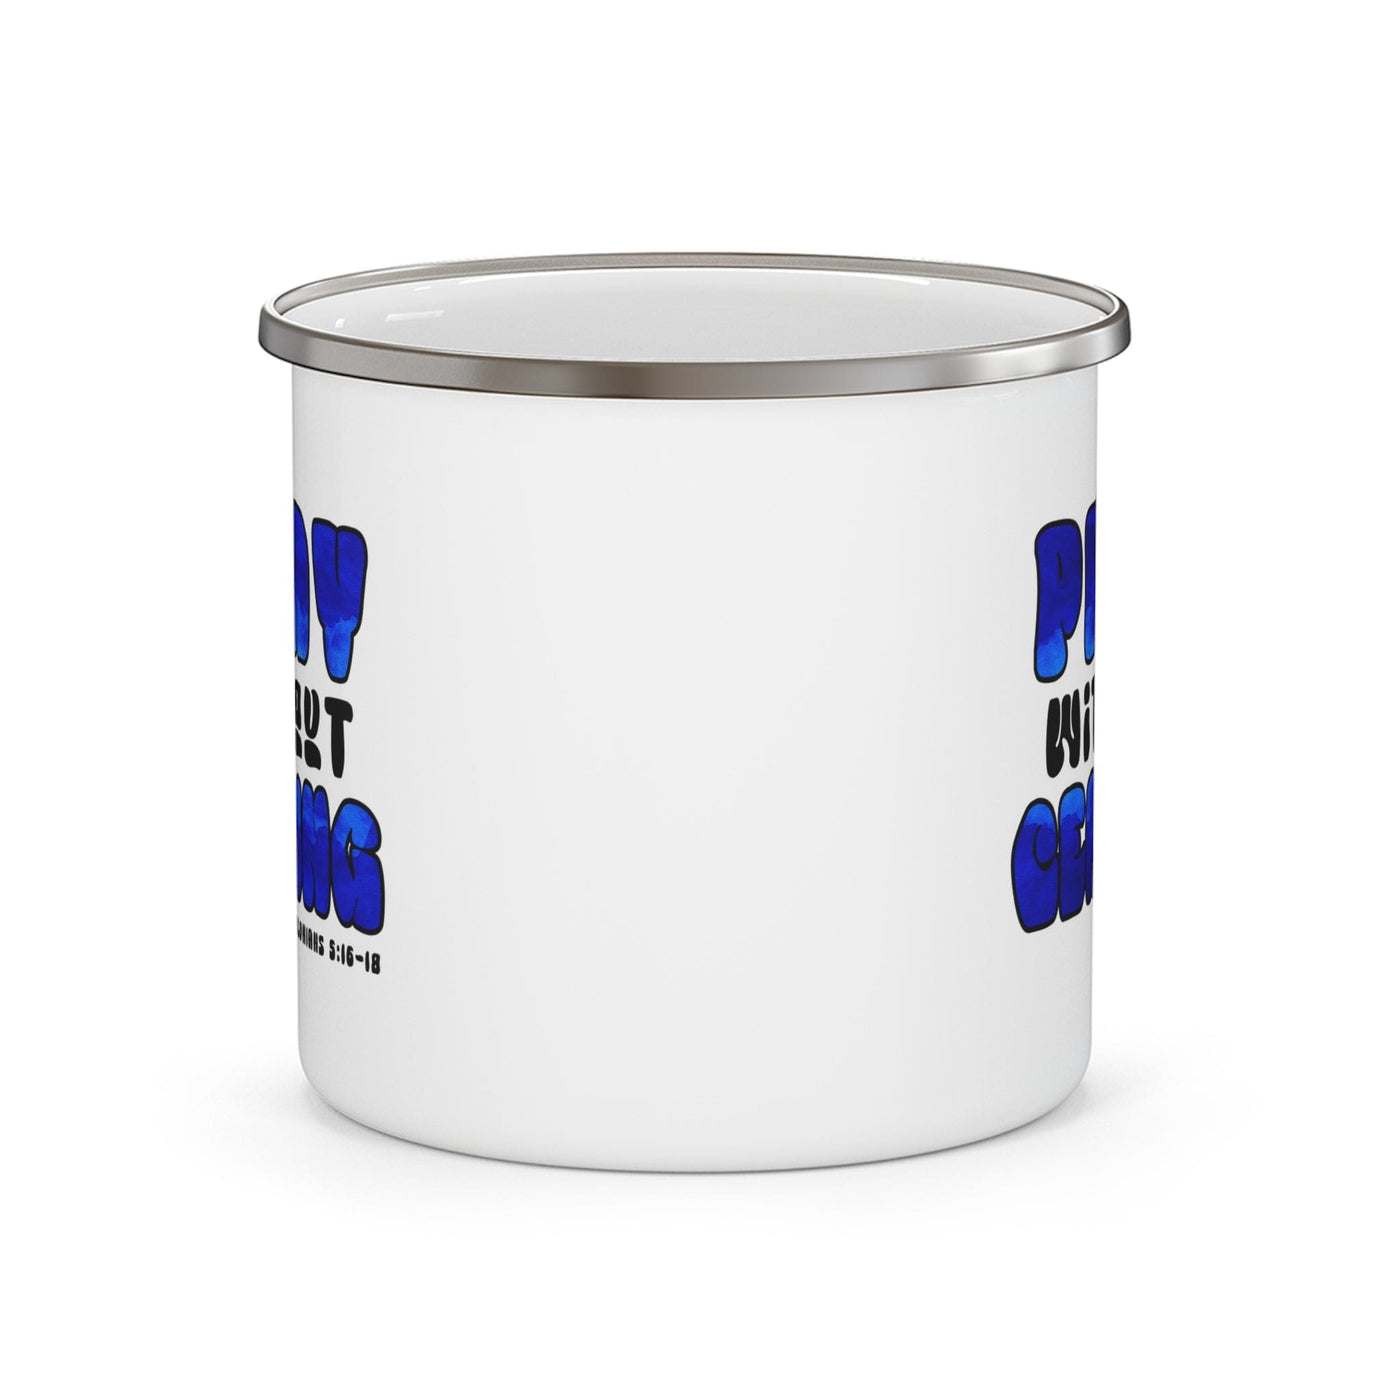 Enamel Camping Mug Pray Without Ceasing Blue And White Christian Inspiration